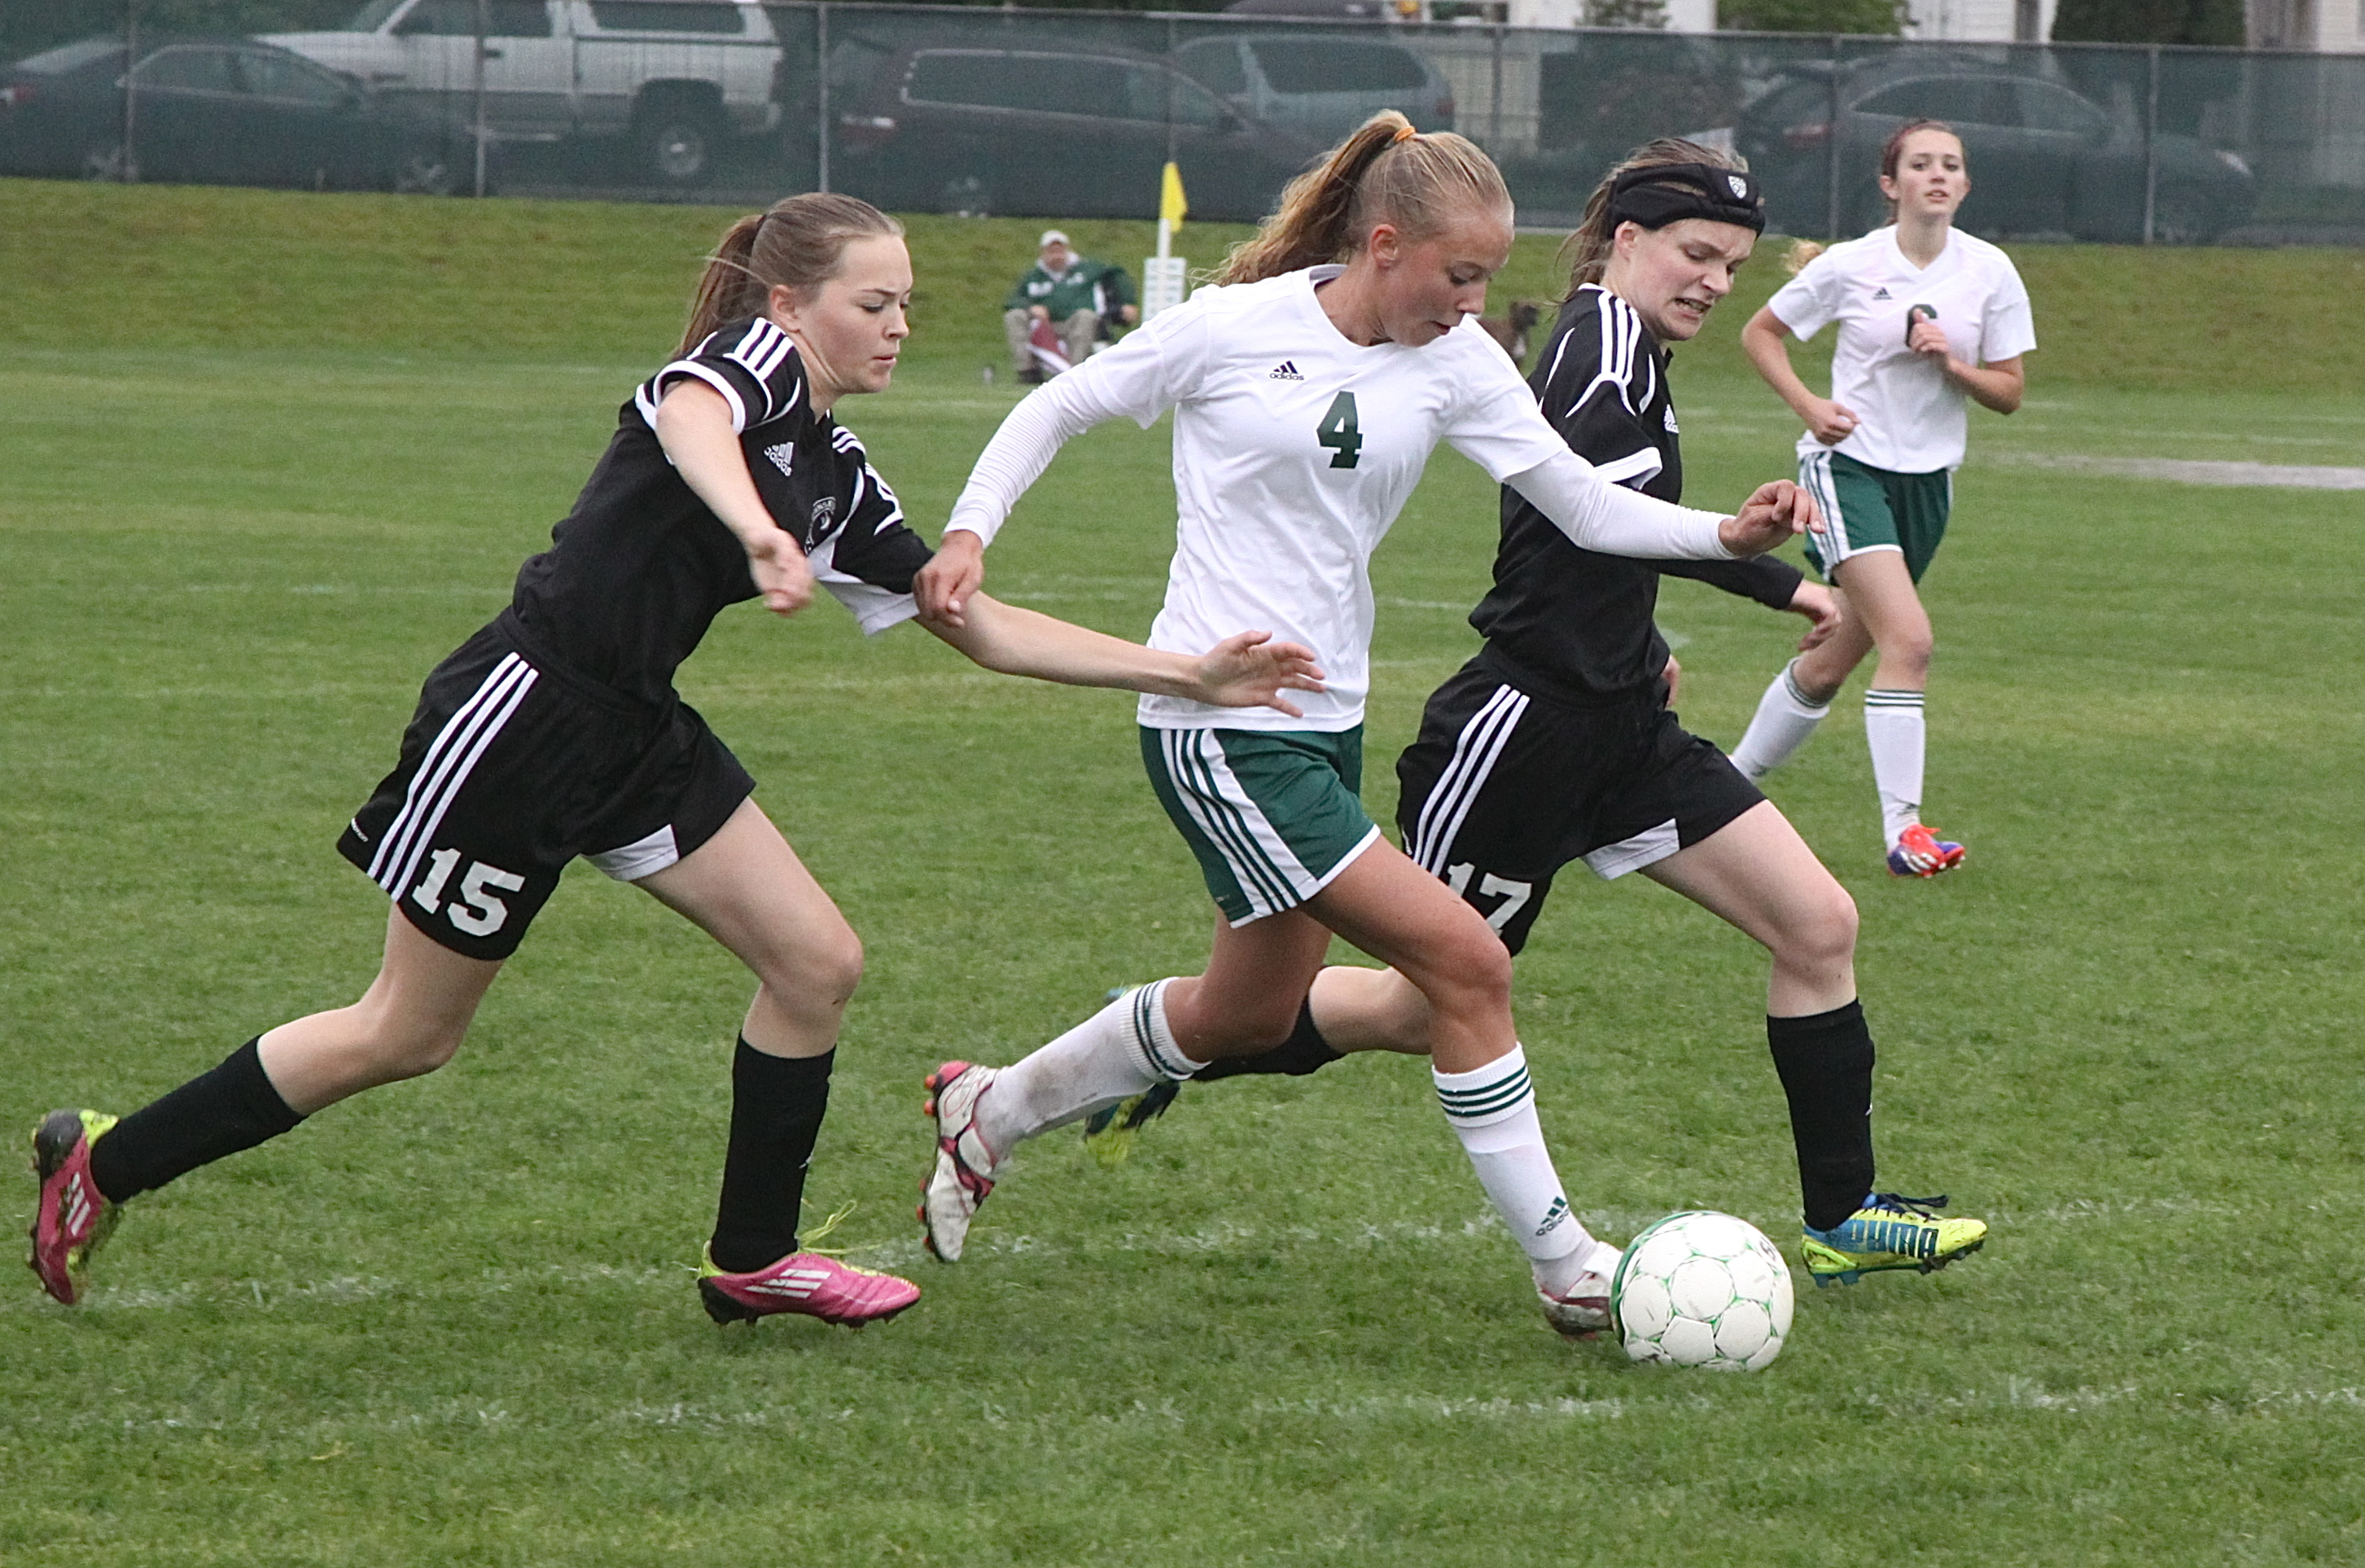 Port Angeles' Maddie Boe (4) contends with Port Townsend's Anne Meek (15) and Rebecca Stewart (17) for possession of the ball. Dave Logan/for Peninsula Daily News